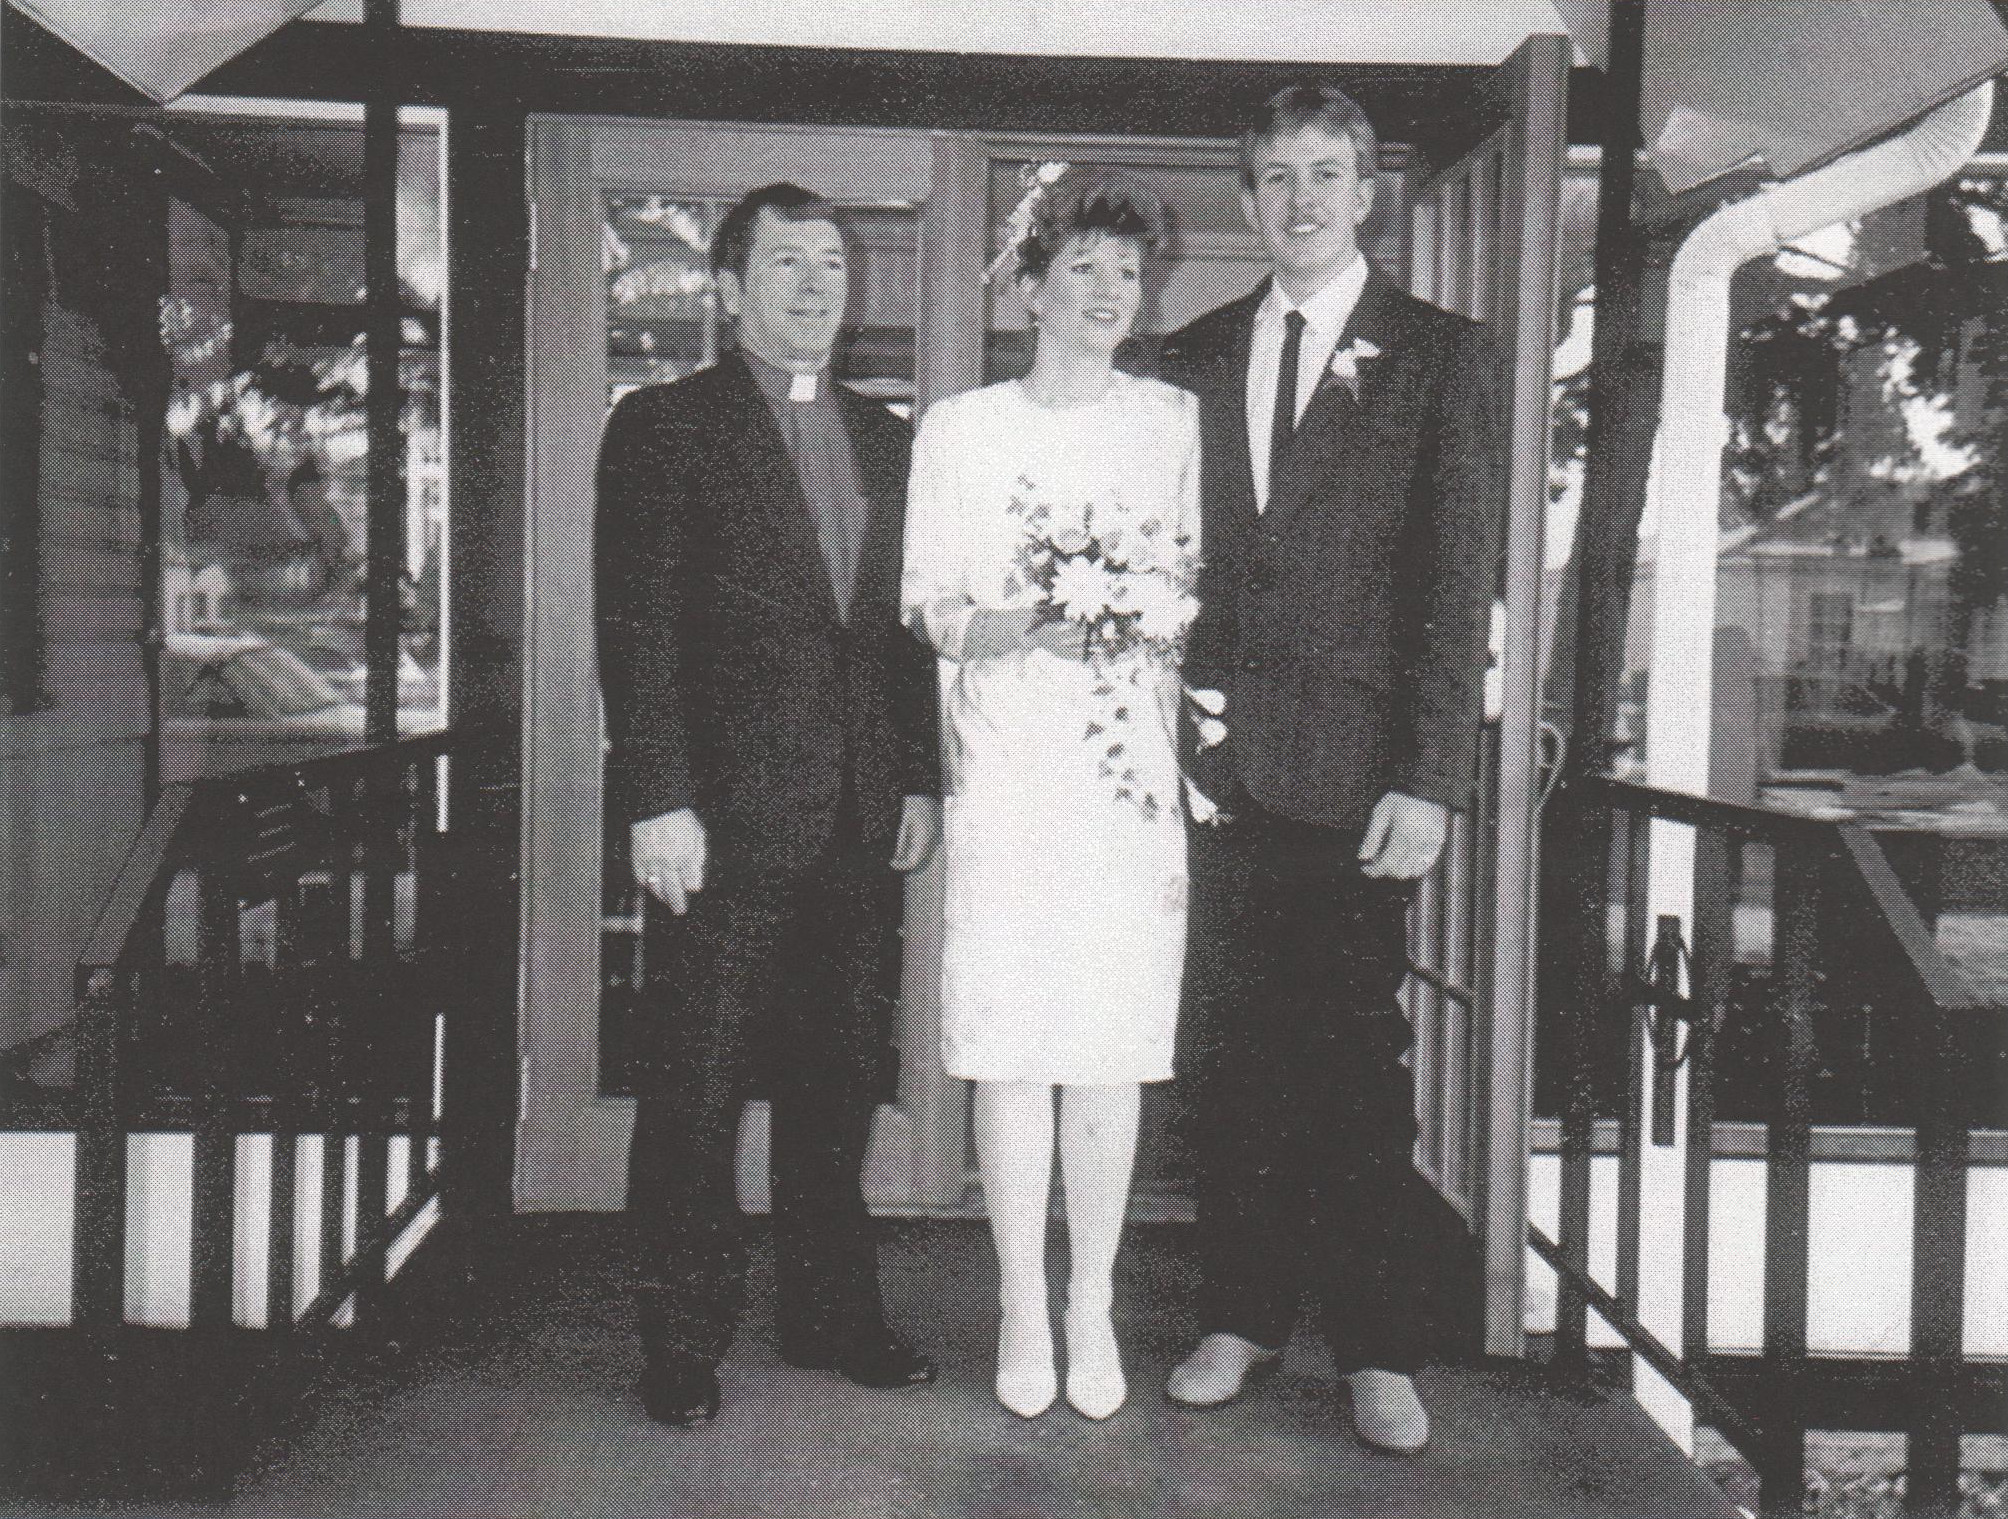 Kim and Dave with Dick Lemmon after their wedding in 1988